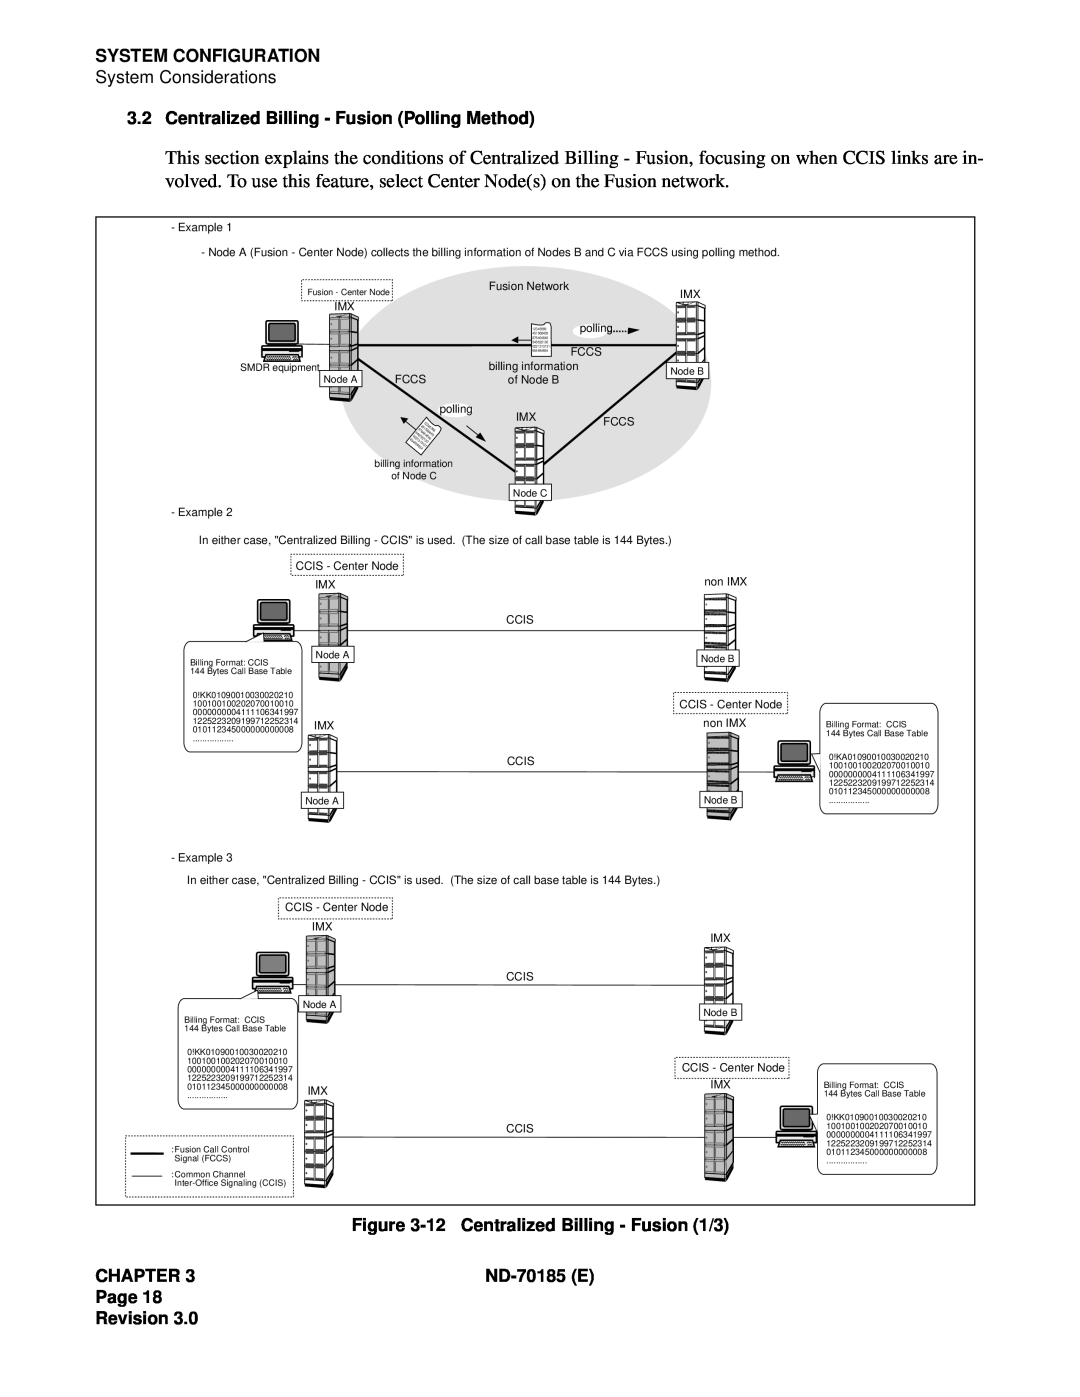 NEC NEAX2400 System Configuration, 3.2Centralized Billing - Fusion Polling Method, Centralized Billing - Fusion 1/3, Page 